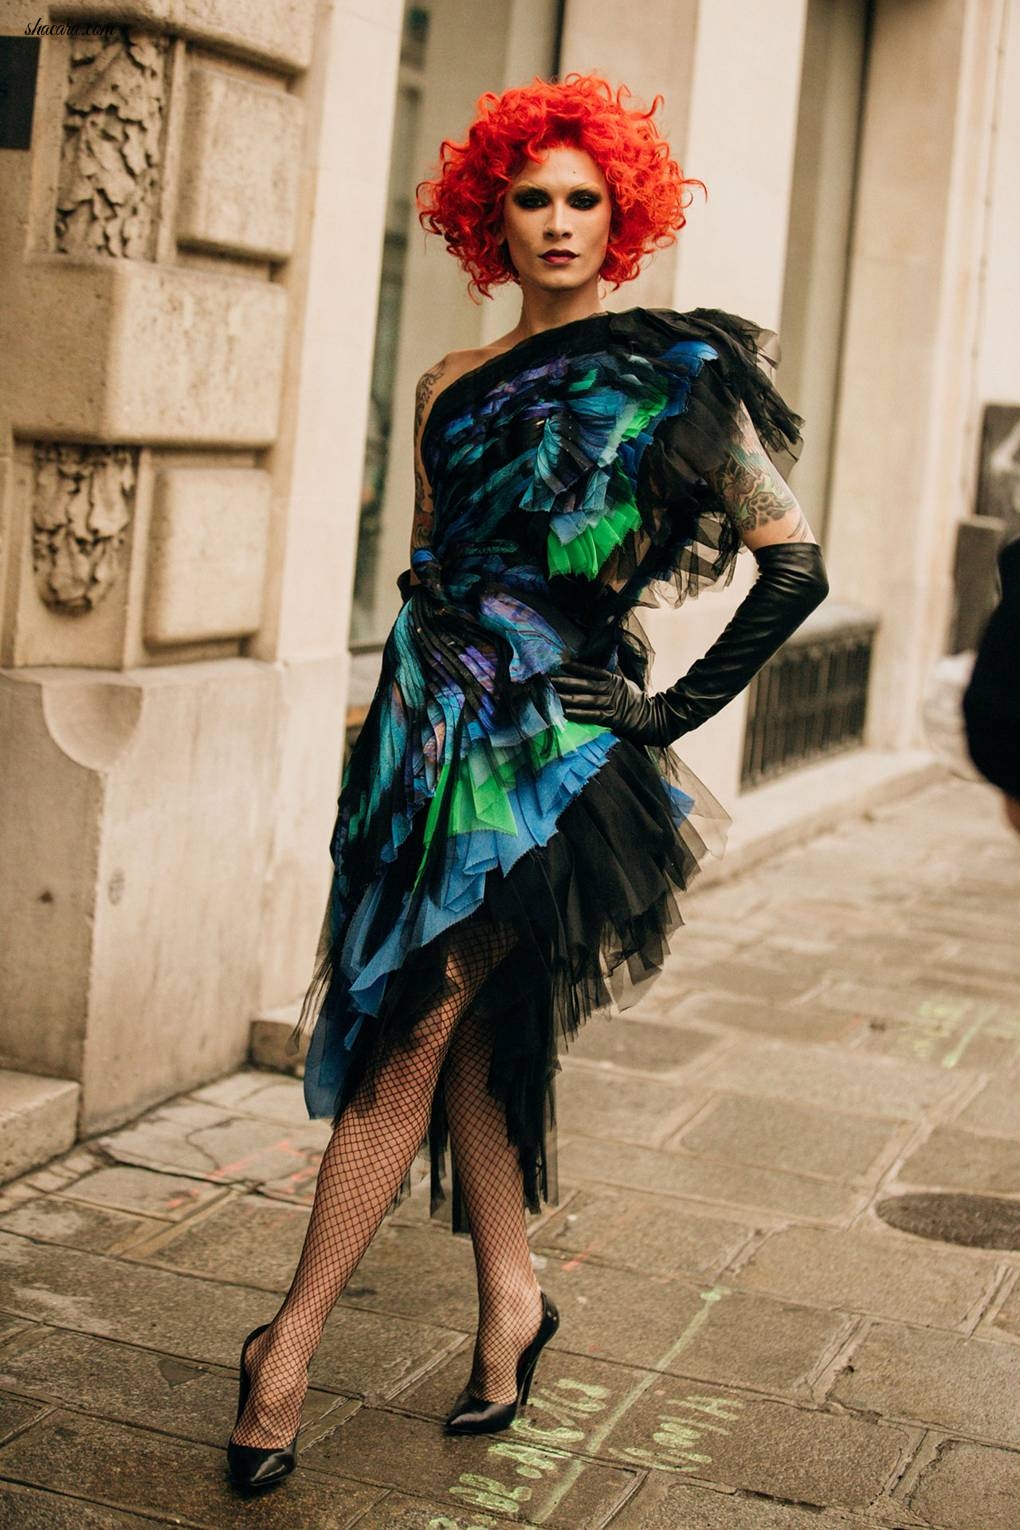 THE BEST STREET STYLE FROM COUTURE FASHION WEEK PART 6